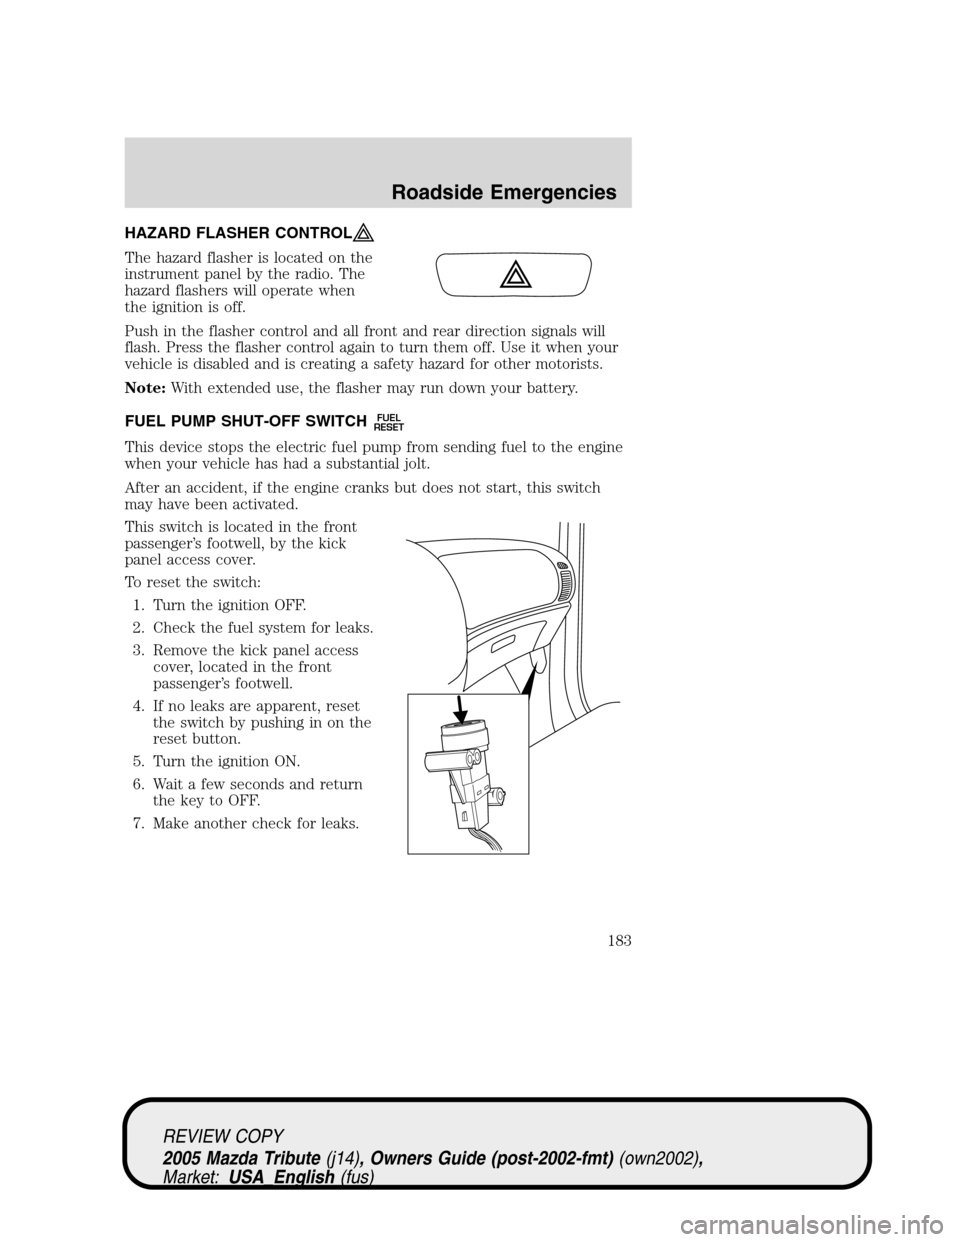 MAZDA MODEL TRIBUTE 2005  Owners Manual (in English) HAZARD FLASHER CONTROL
The hazard flasher is located on the
instrument panel by the radio. The
hazard flashers will operate when
the ignition is off.
Push in the flasher control and all front and rear